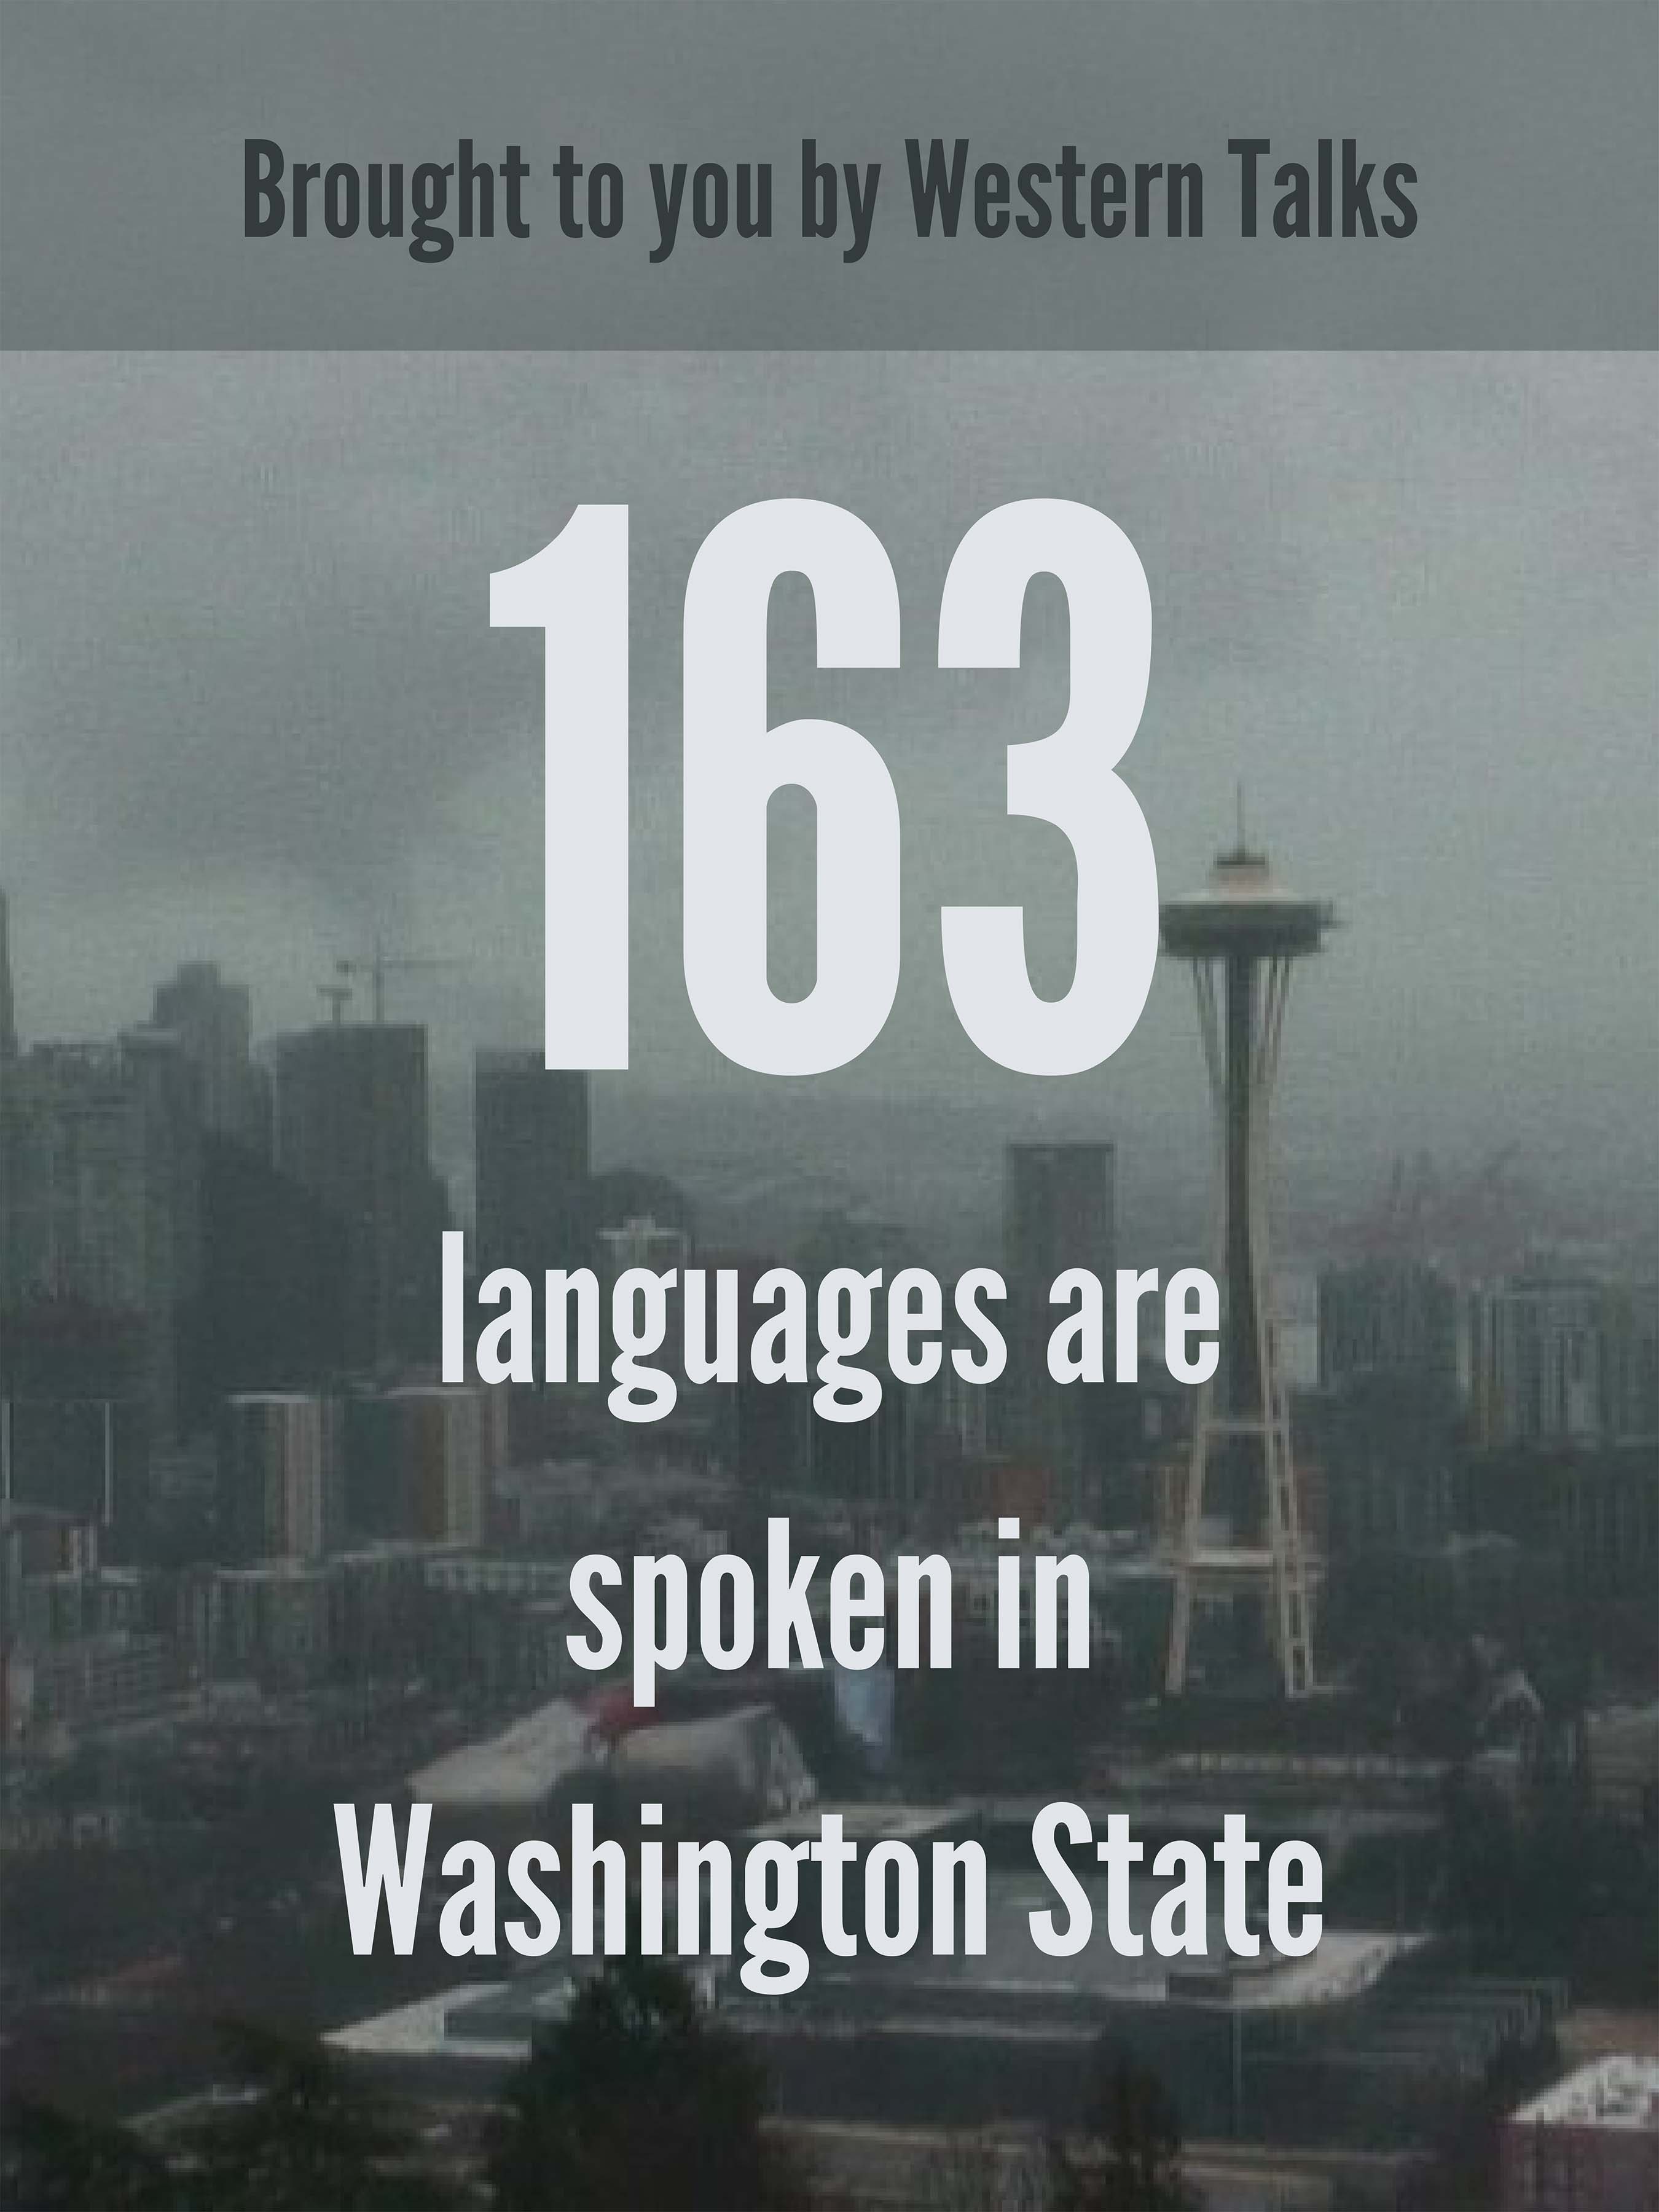 163 languages are spoken in Washington State. Brought to you by Western Talks.